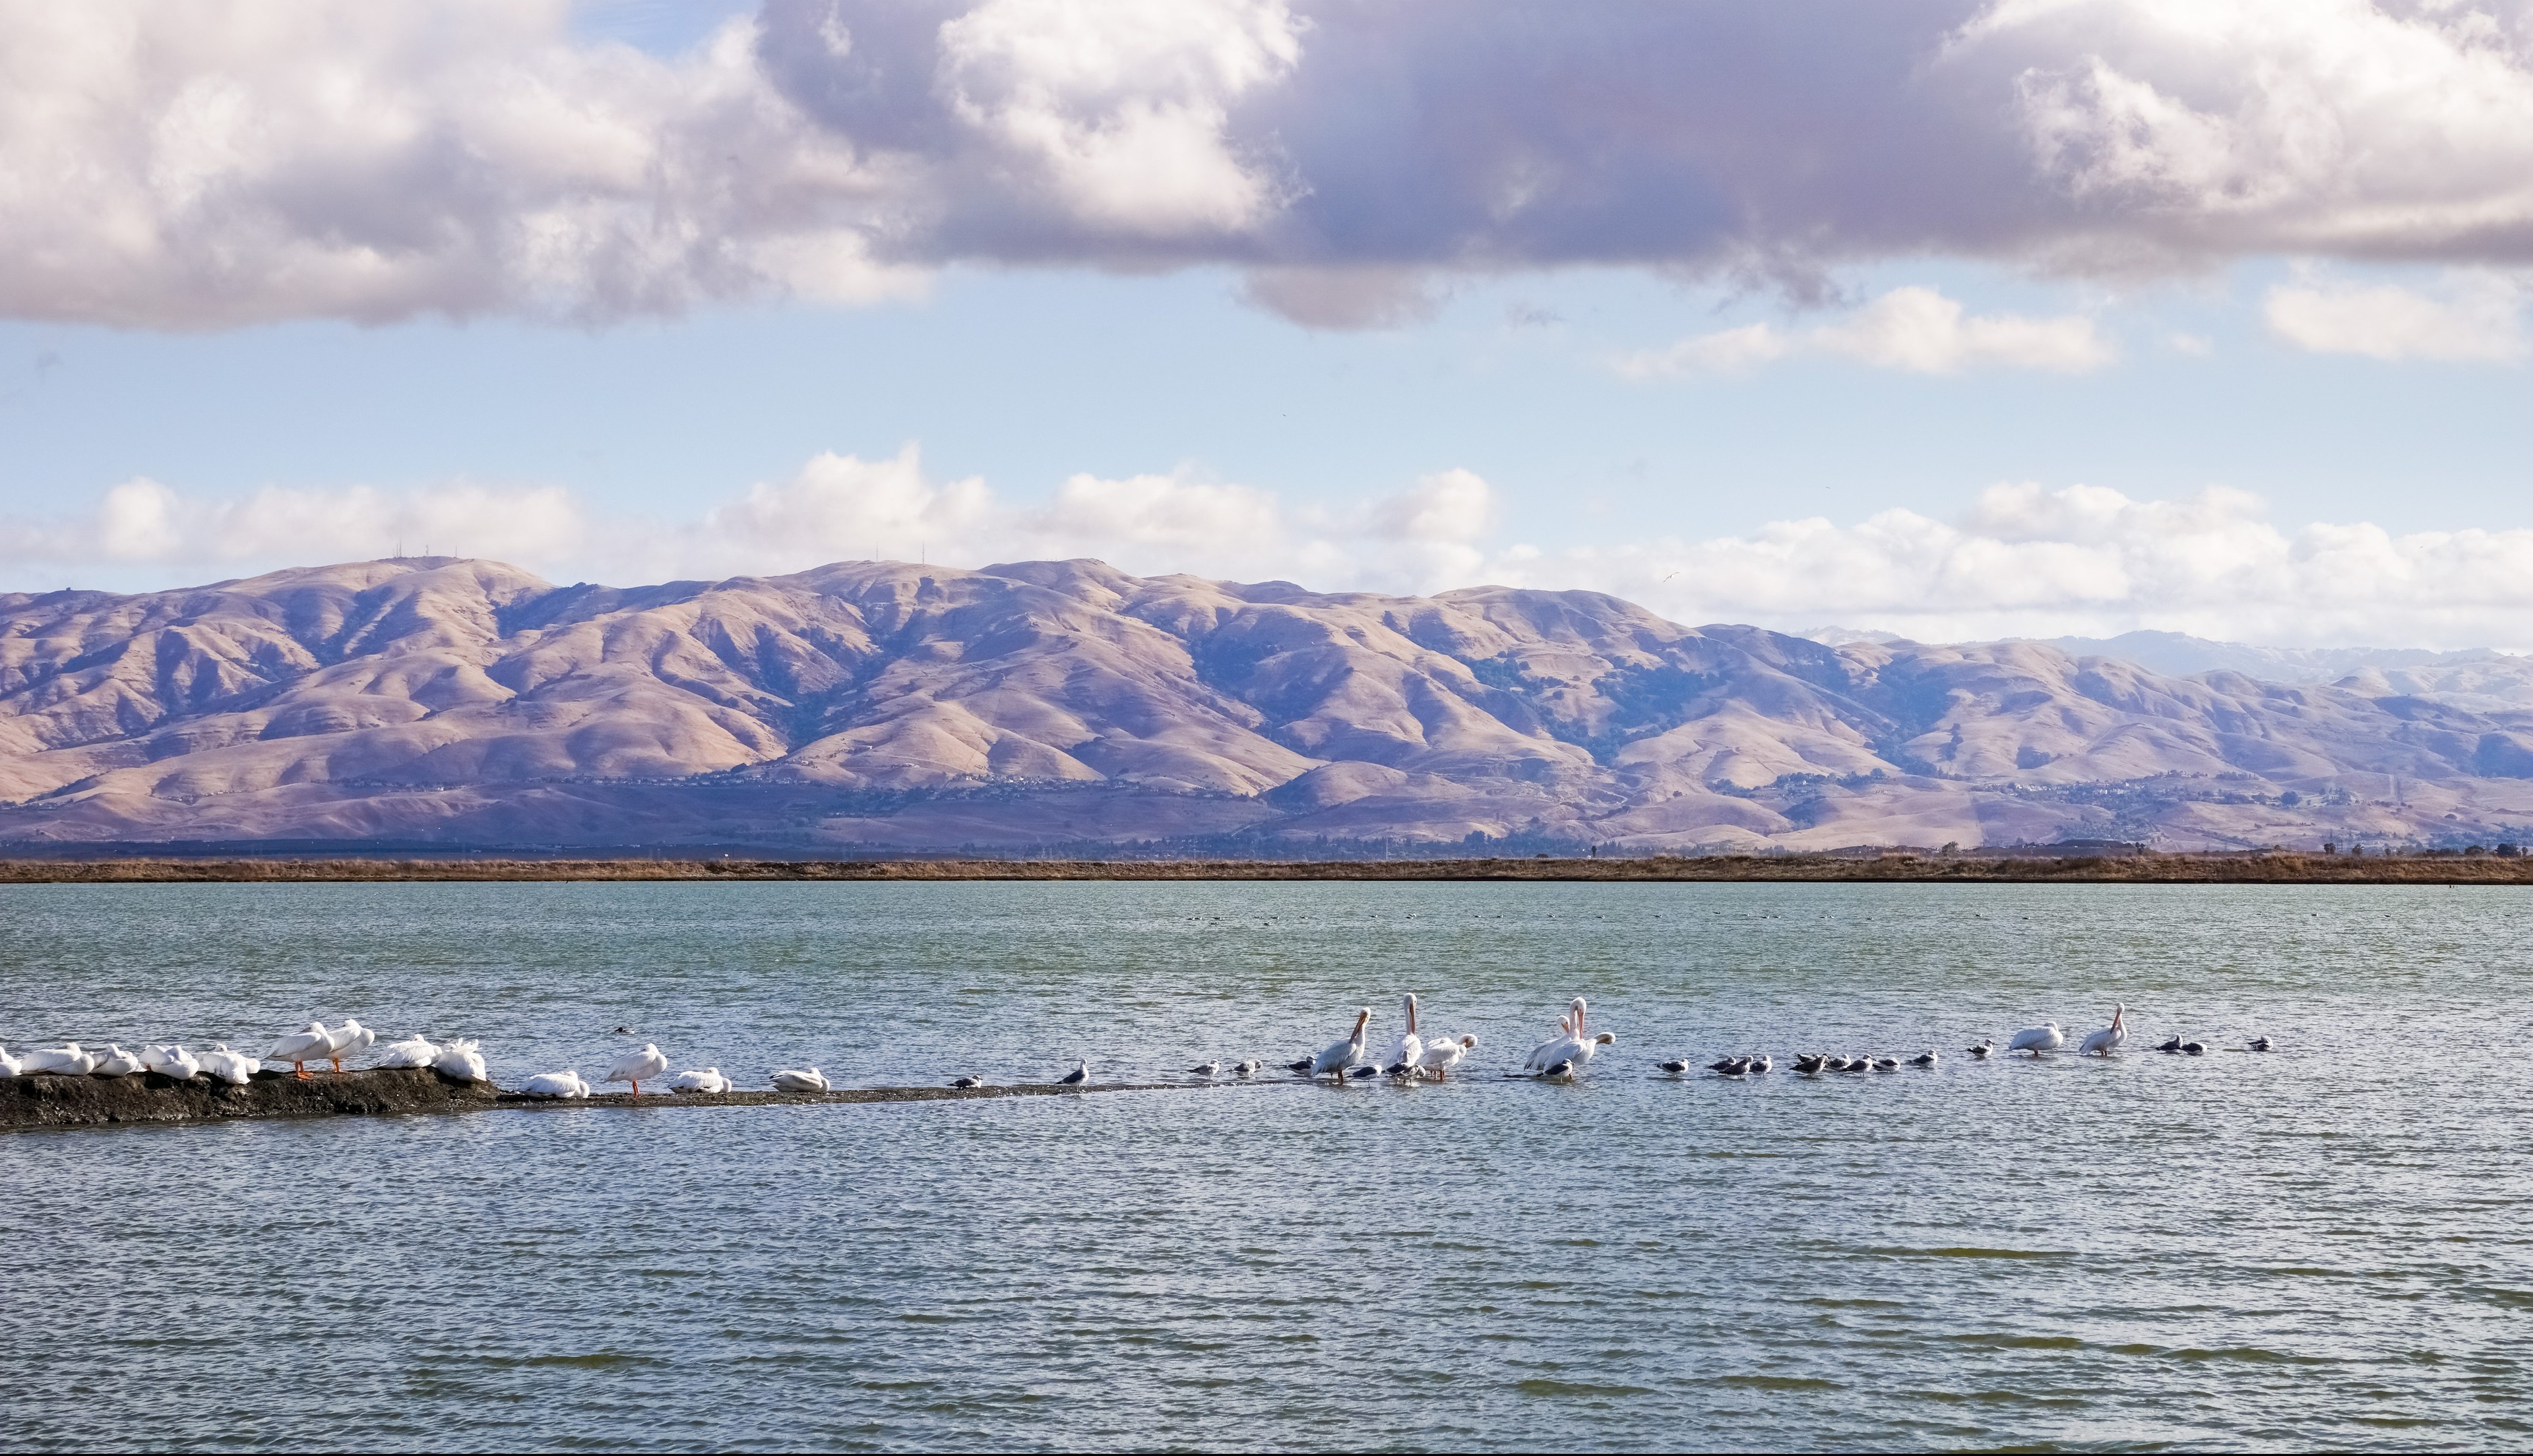 Pelicans rest on a levee in South San Francisco Bay on a cloudy day; on the background Mission Peak and Monument Peak, Sunnyvale bay trail, California